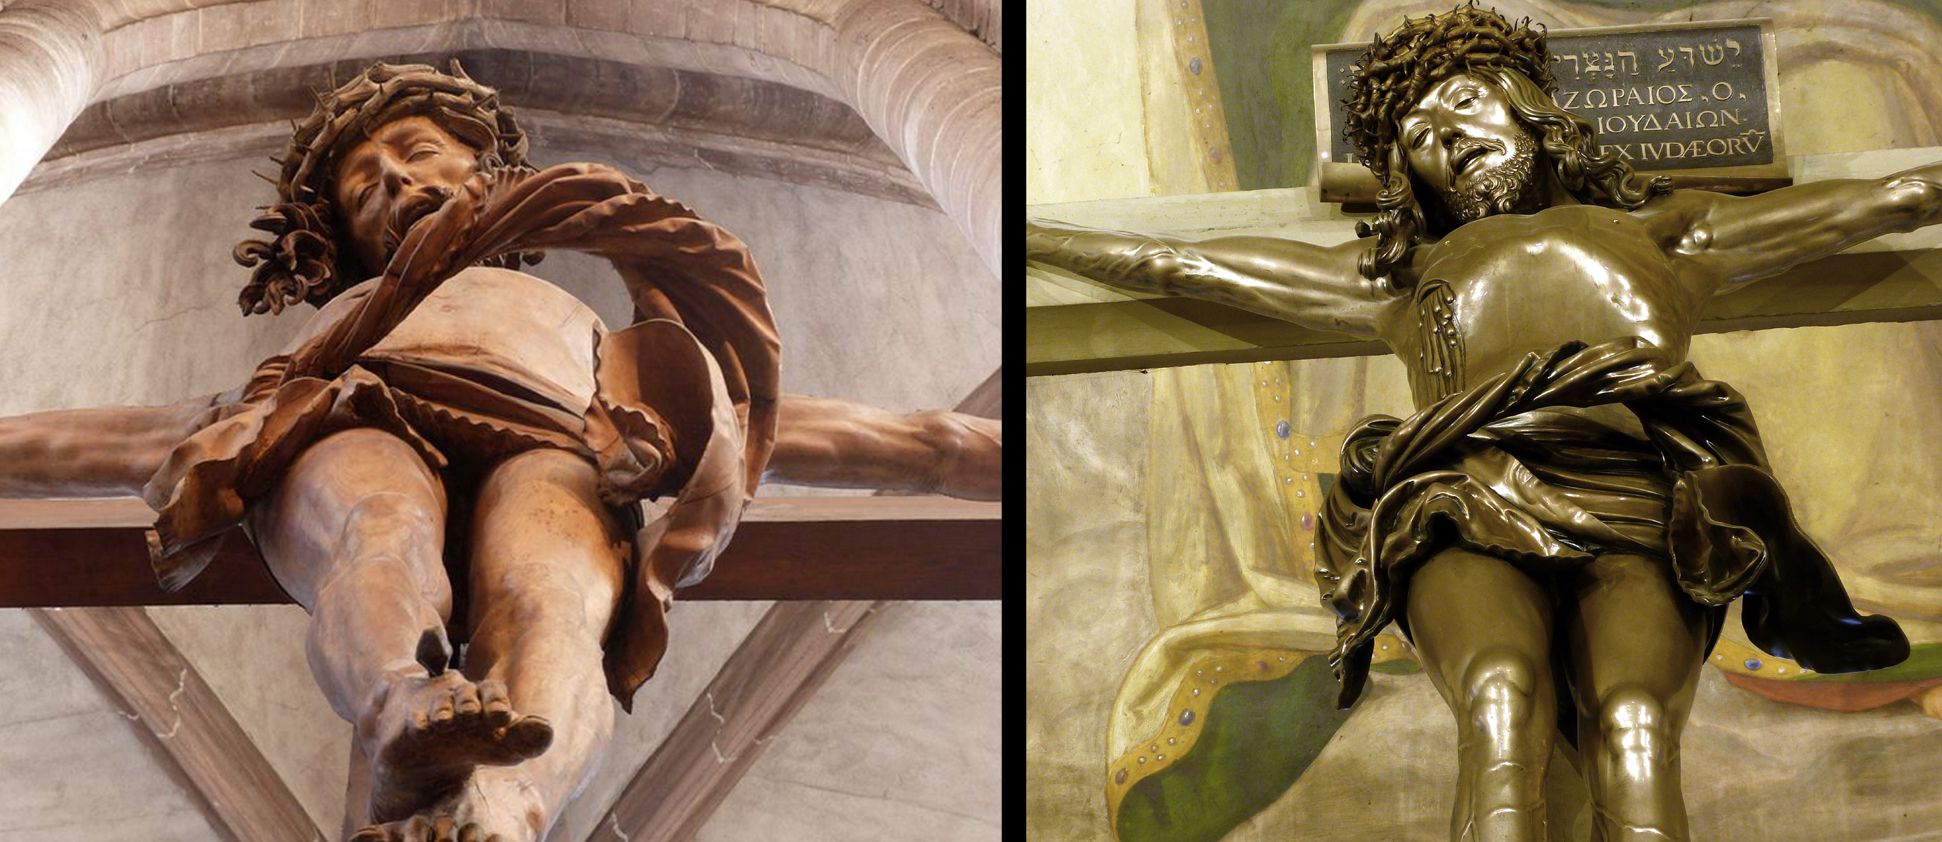 Crucifix Comparison with crucifix (1520) by Veit Stoss in St. Sebaldus Church, view from below